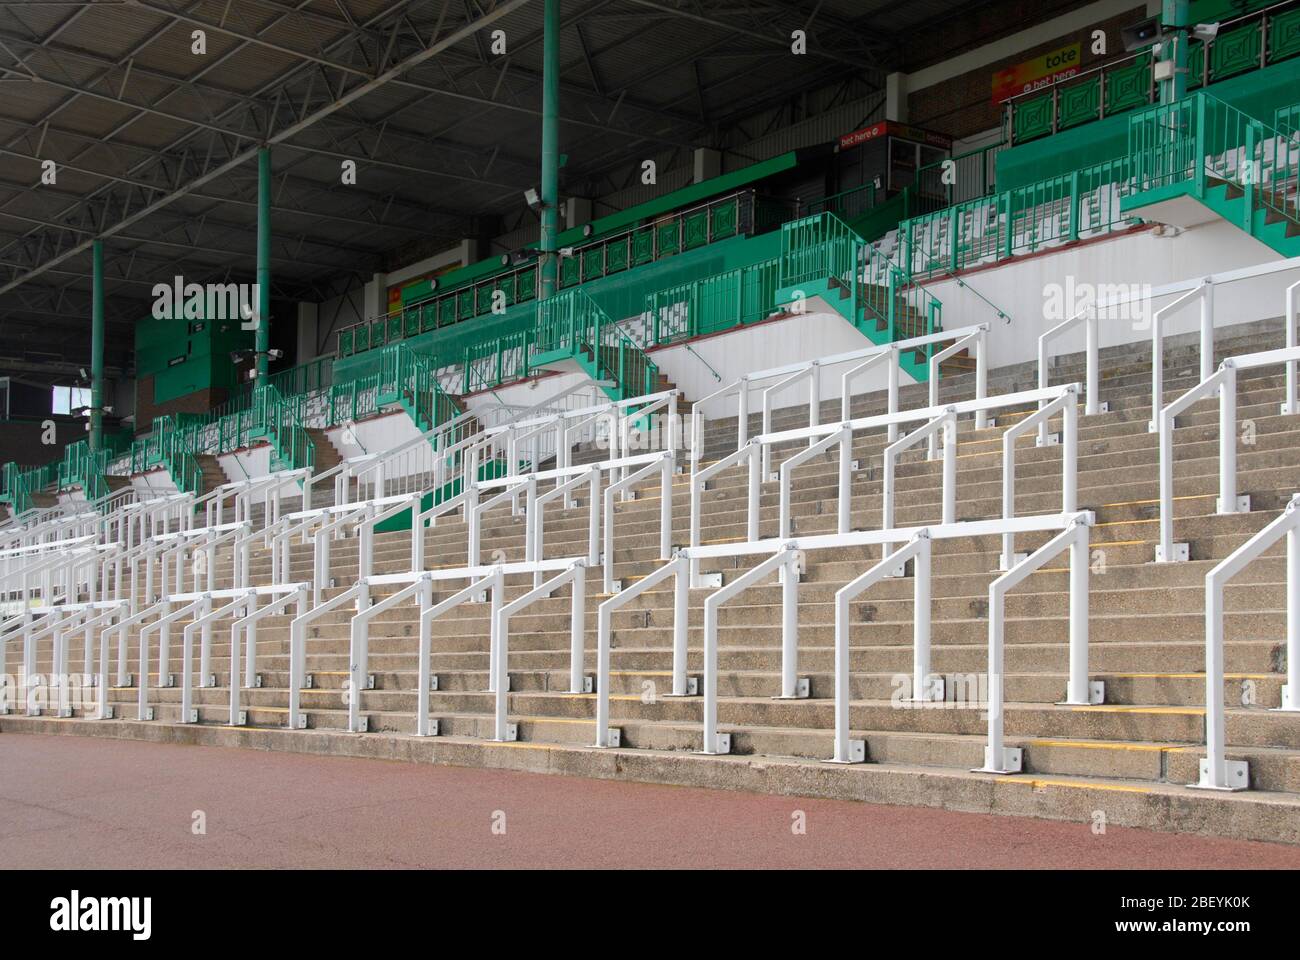 Empty grandstand at sports arena Stock Photo